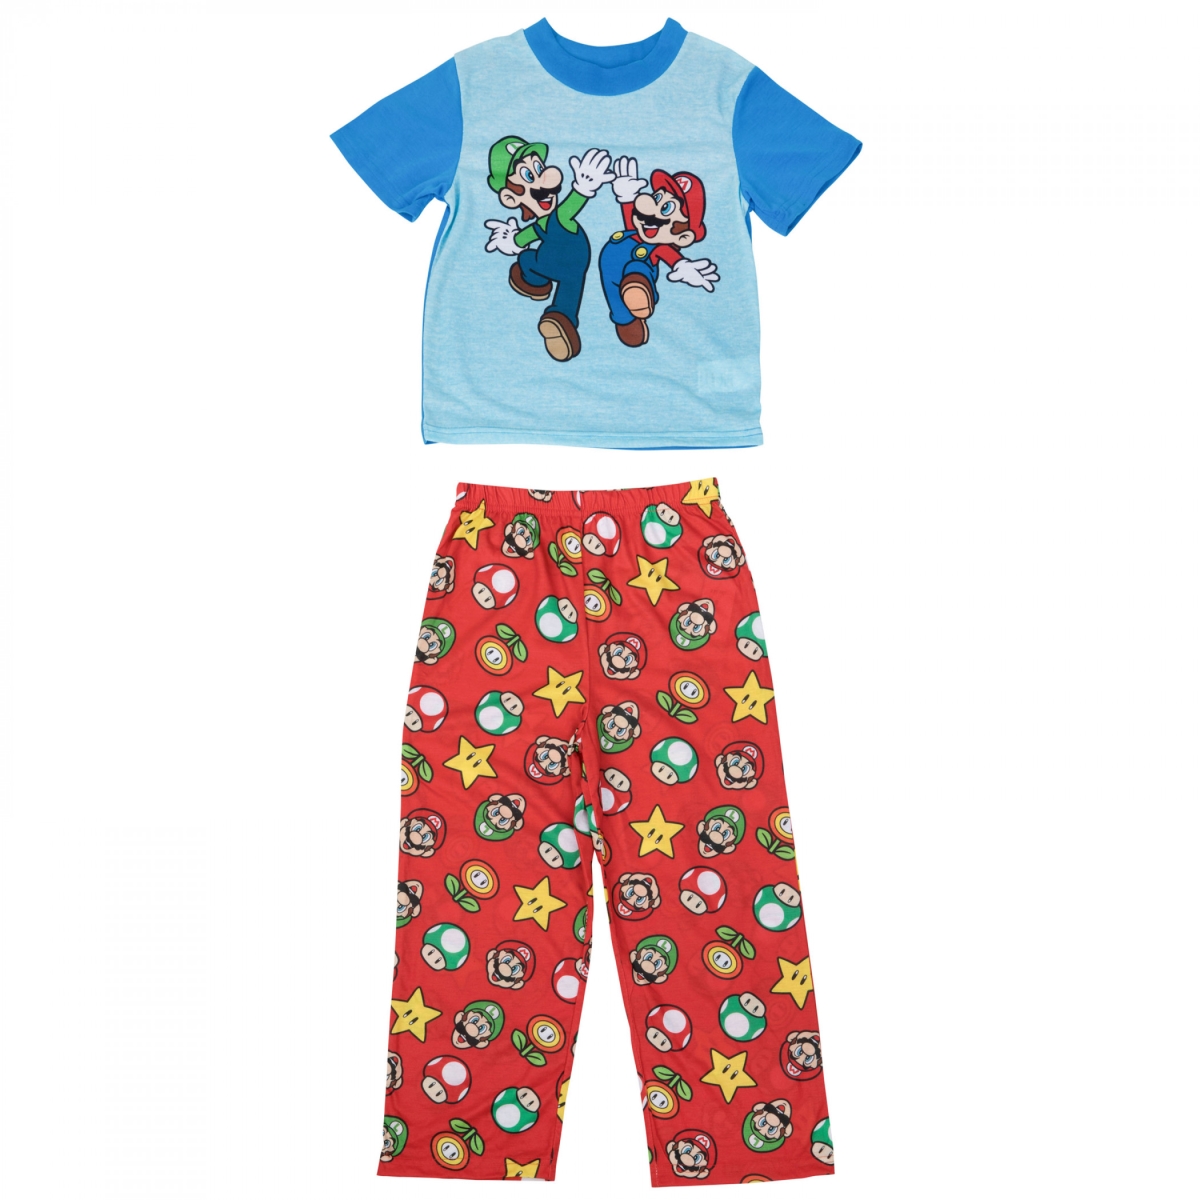 Picture of Super Mario Bros 856224-size8 High Five Pajama Set - Blue & Red - Size 8 - 2 Piece